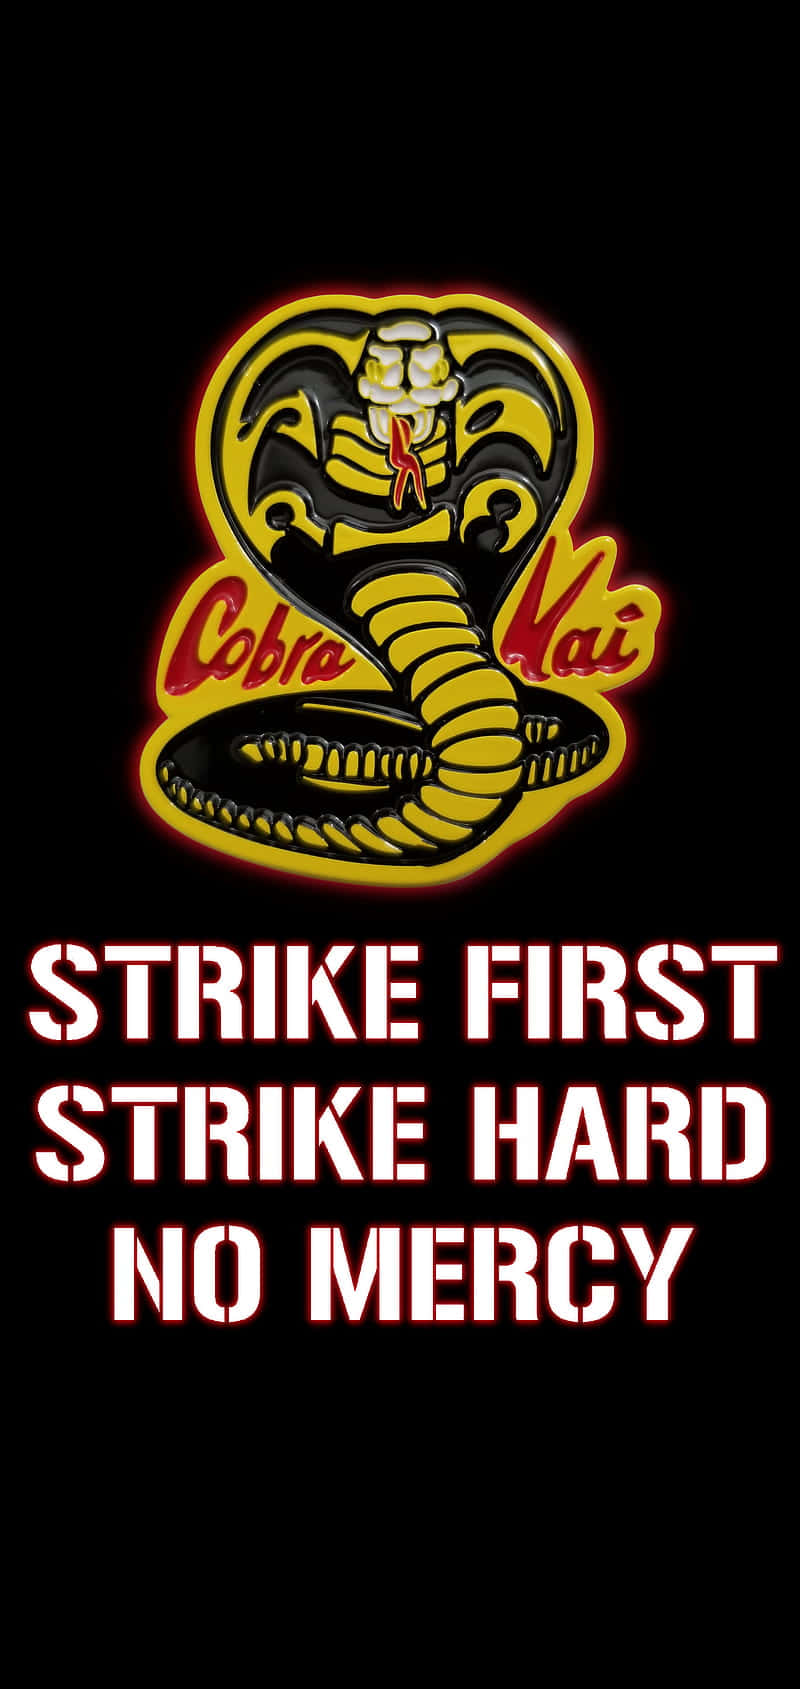 Take your love for Cobra Kai with you everywhere